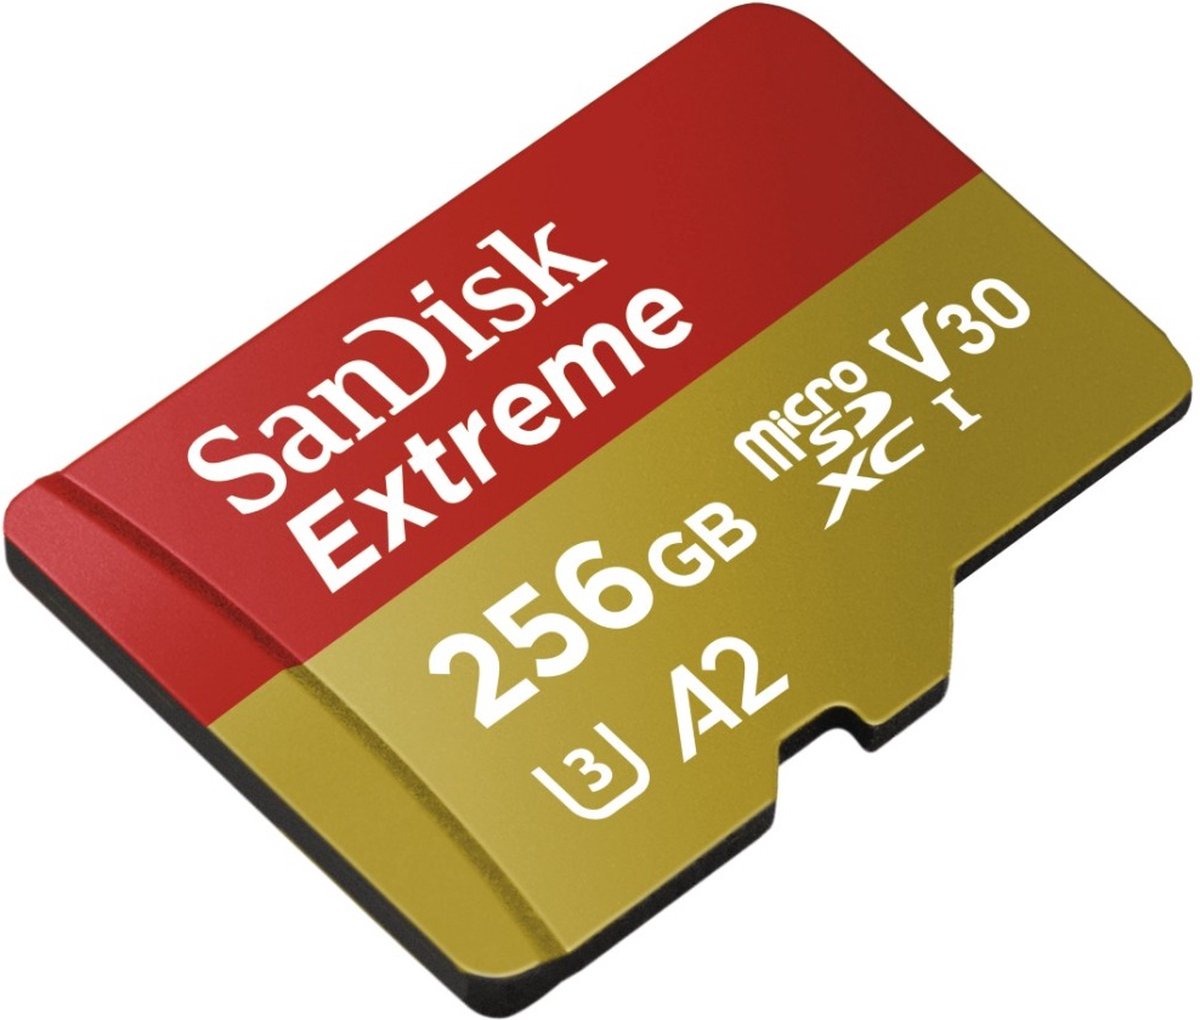 Sandisk Extreme micro kaart 256 GB - dronedepot